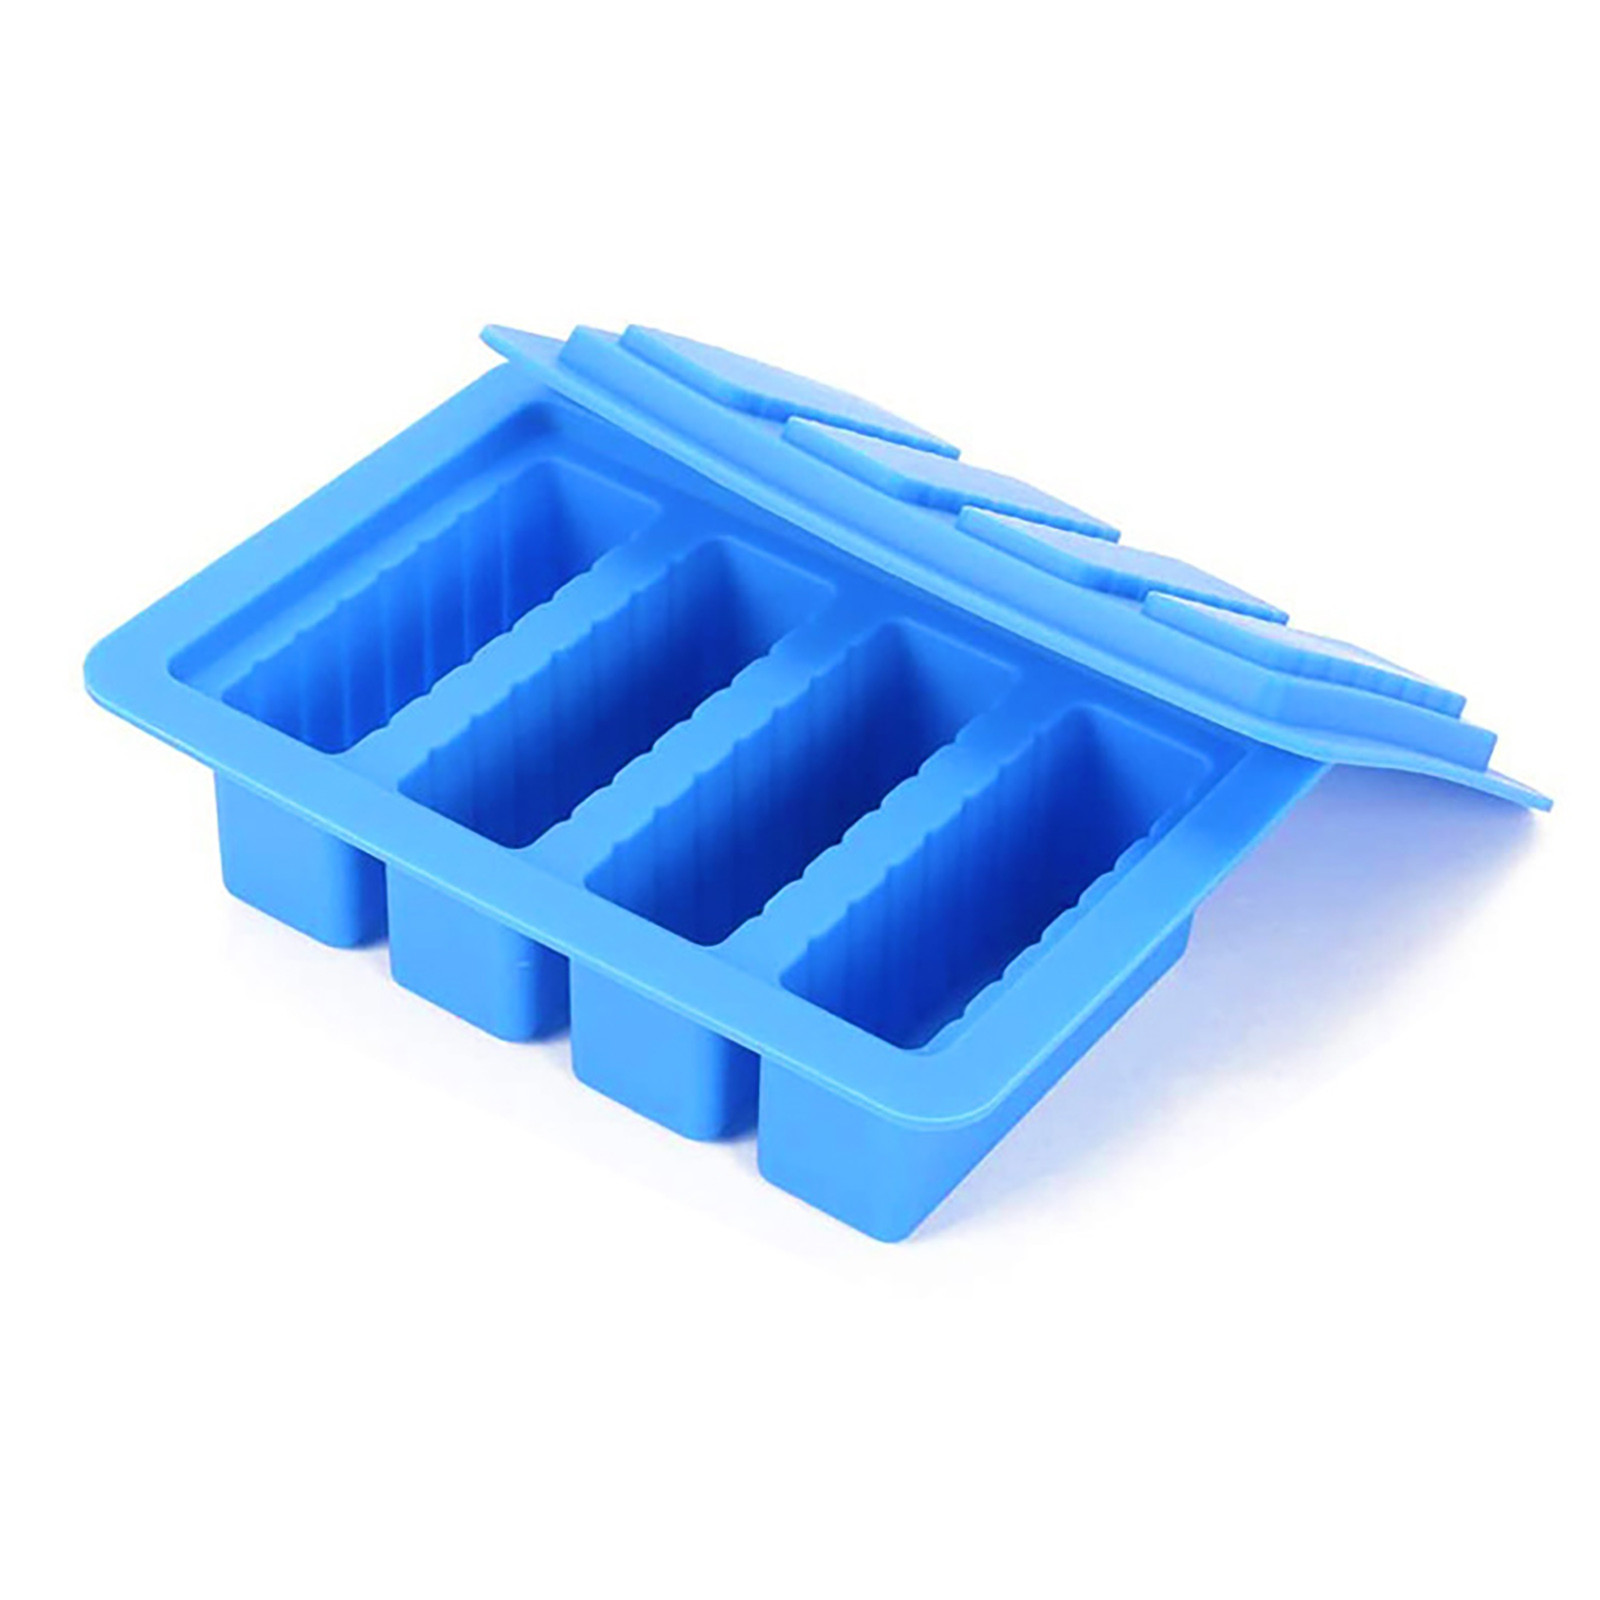 Vikakiooze Butter Mold Tray with Lid Storage The Silicone Butter Molds with  4 Large Storage 